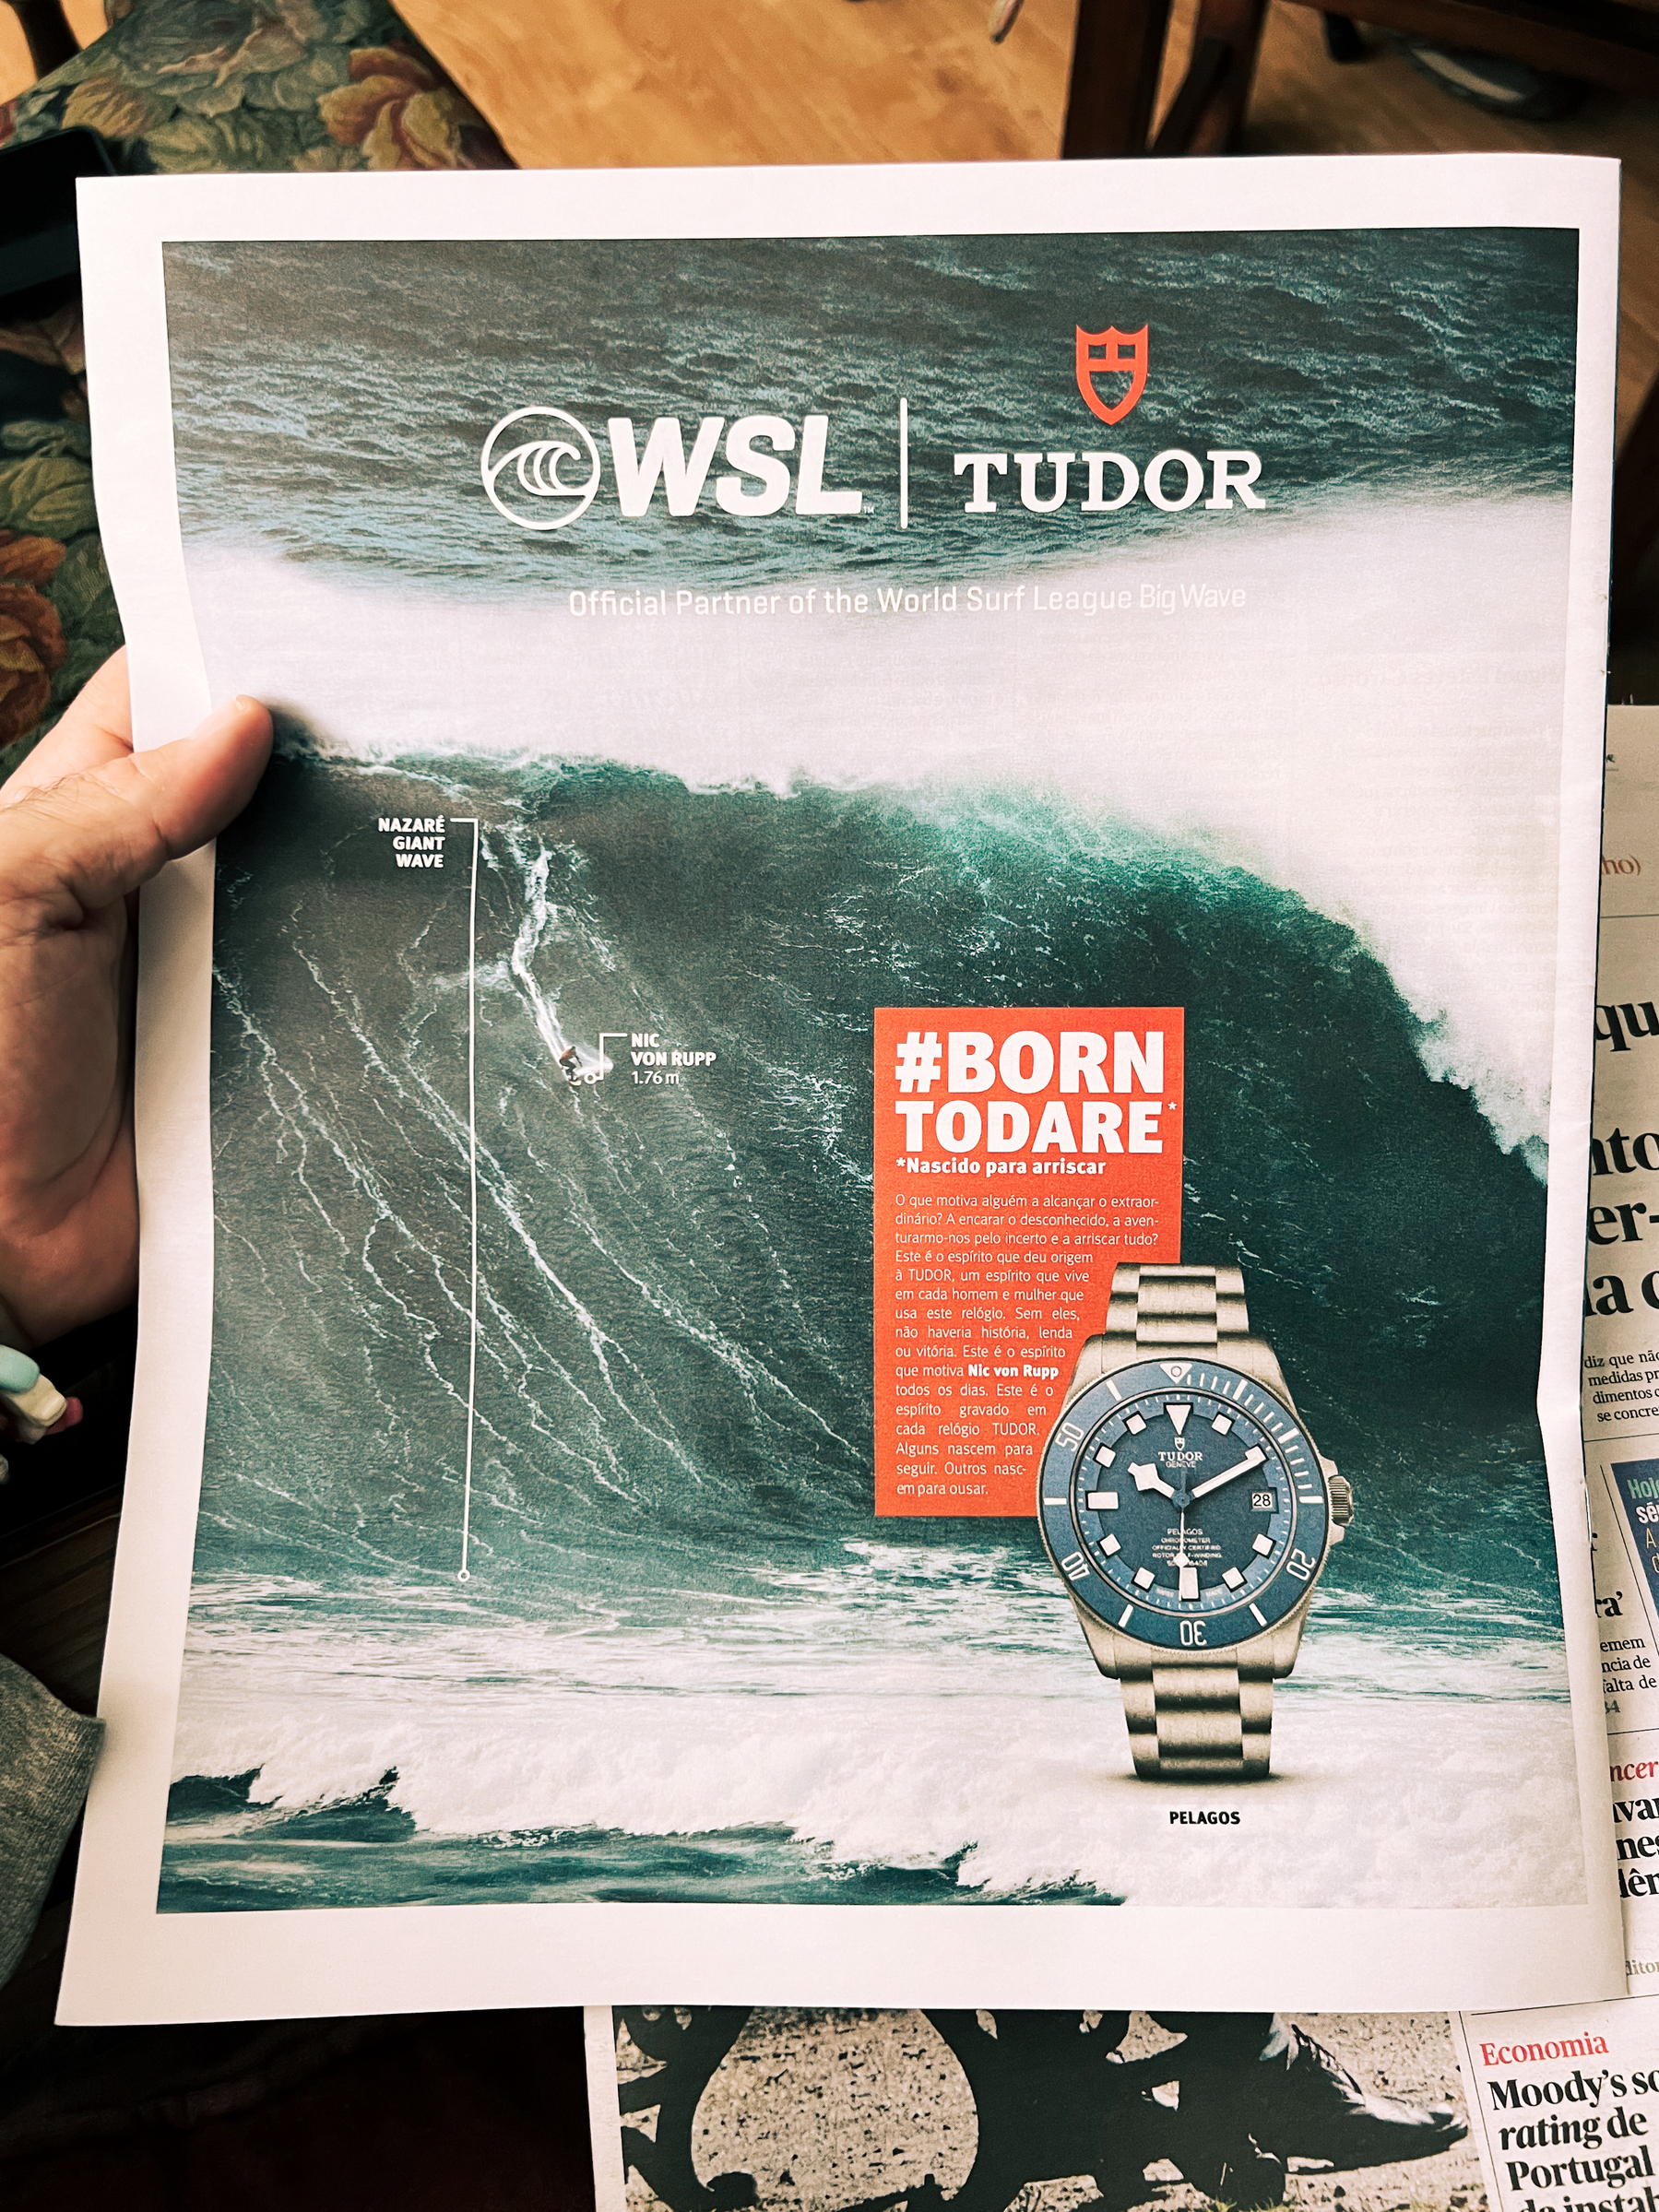 A watch ad, showing the giant wave of Nazaré, a surfer, and a Tudor watch.